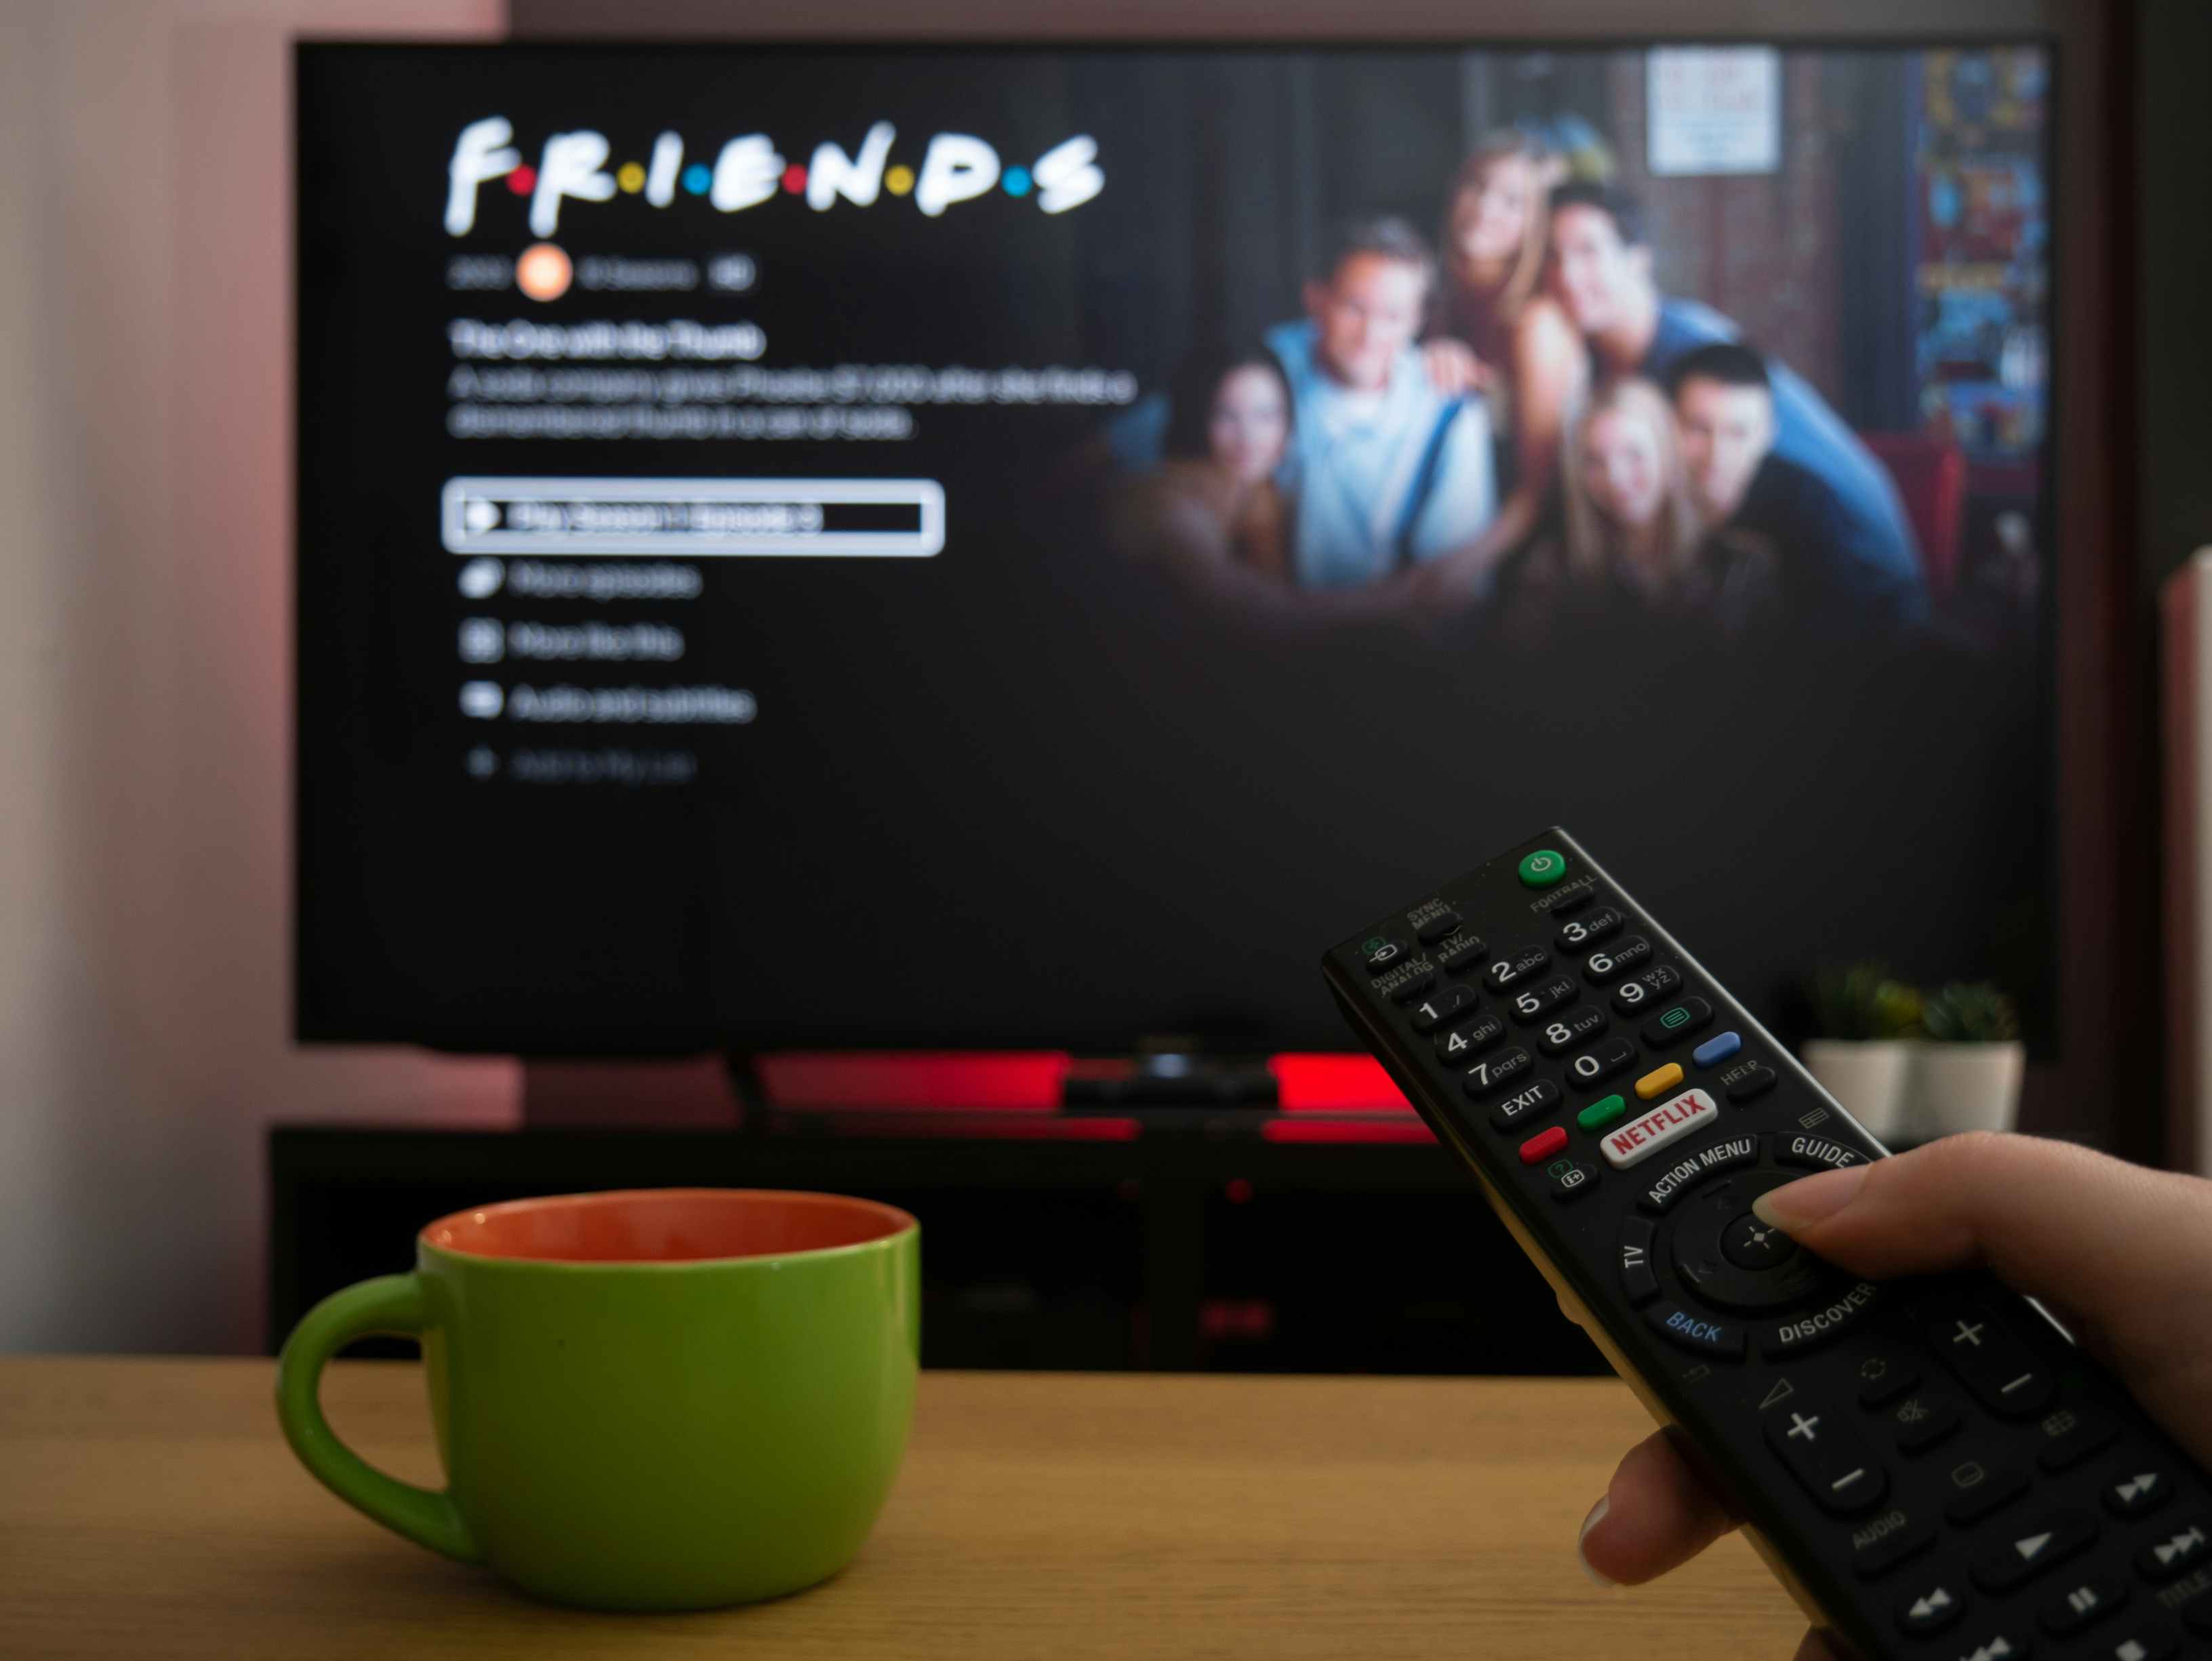 Netflix to charge $8 extra per month for out-of-household viewers